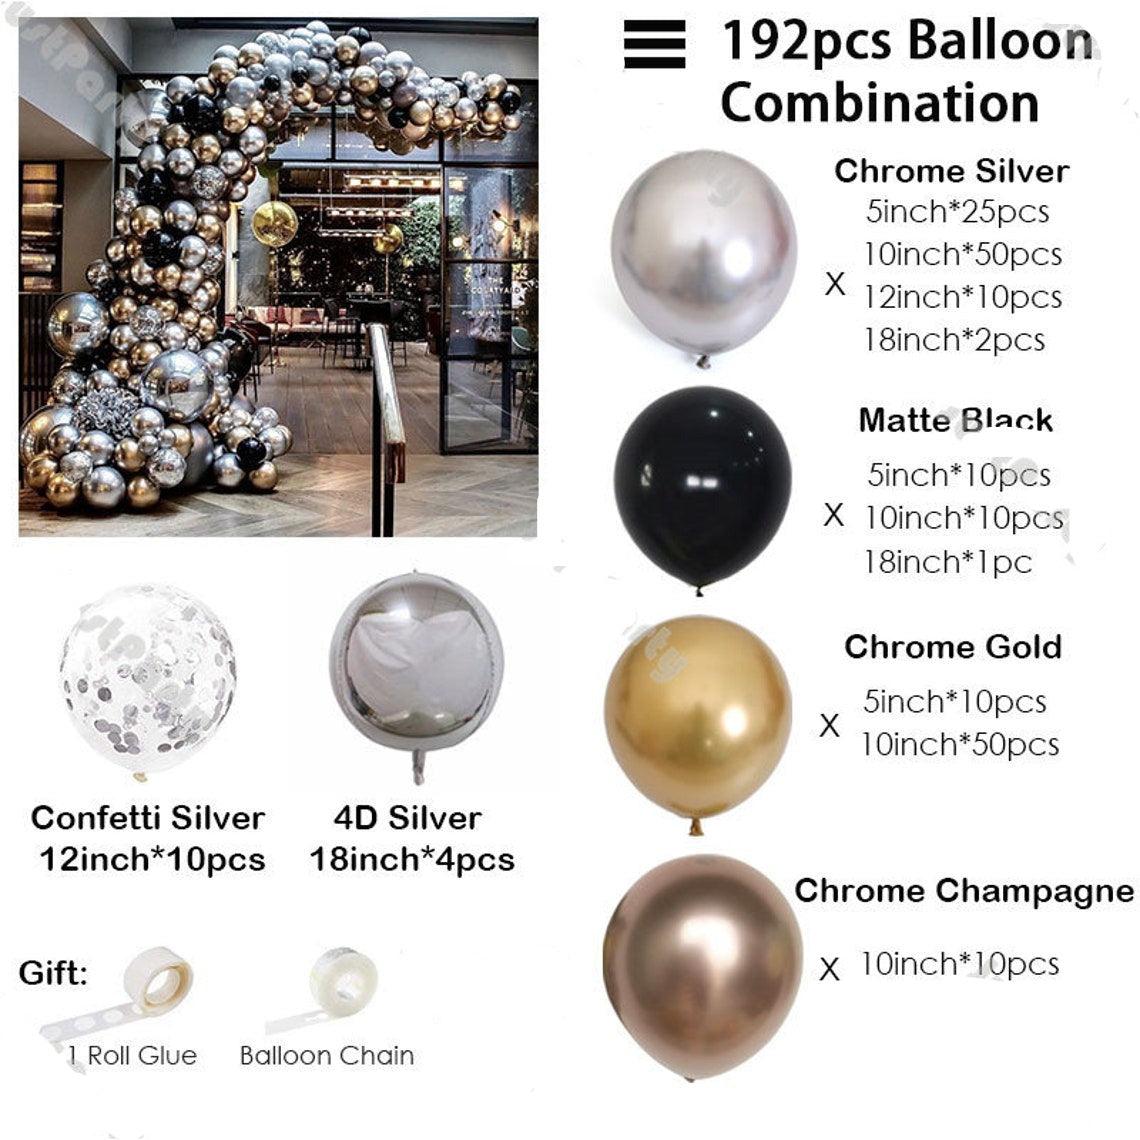 192pcs Chrome Silver Gold Champagne Matte Black Balloon Garland Arch Kit Wedding Supplies Birthday Party - If you say i do